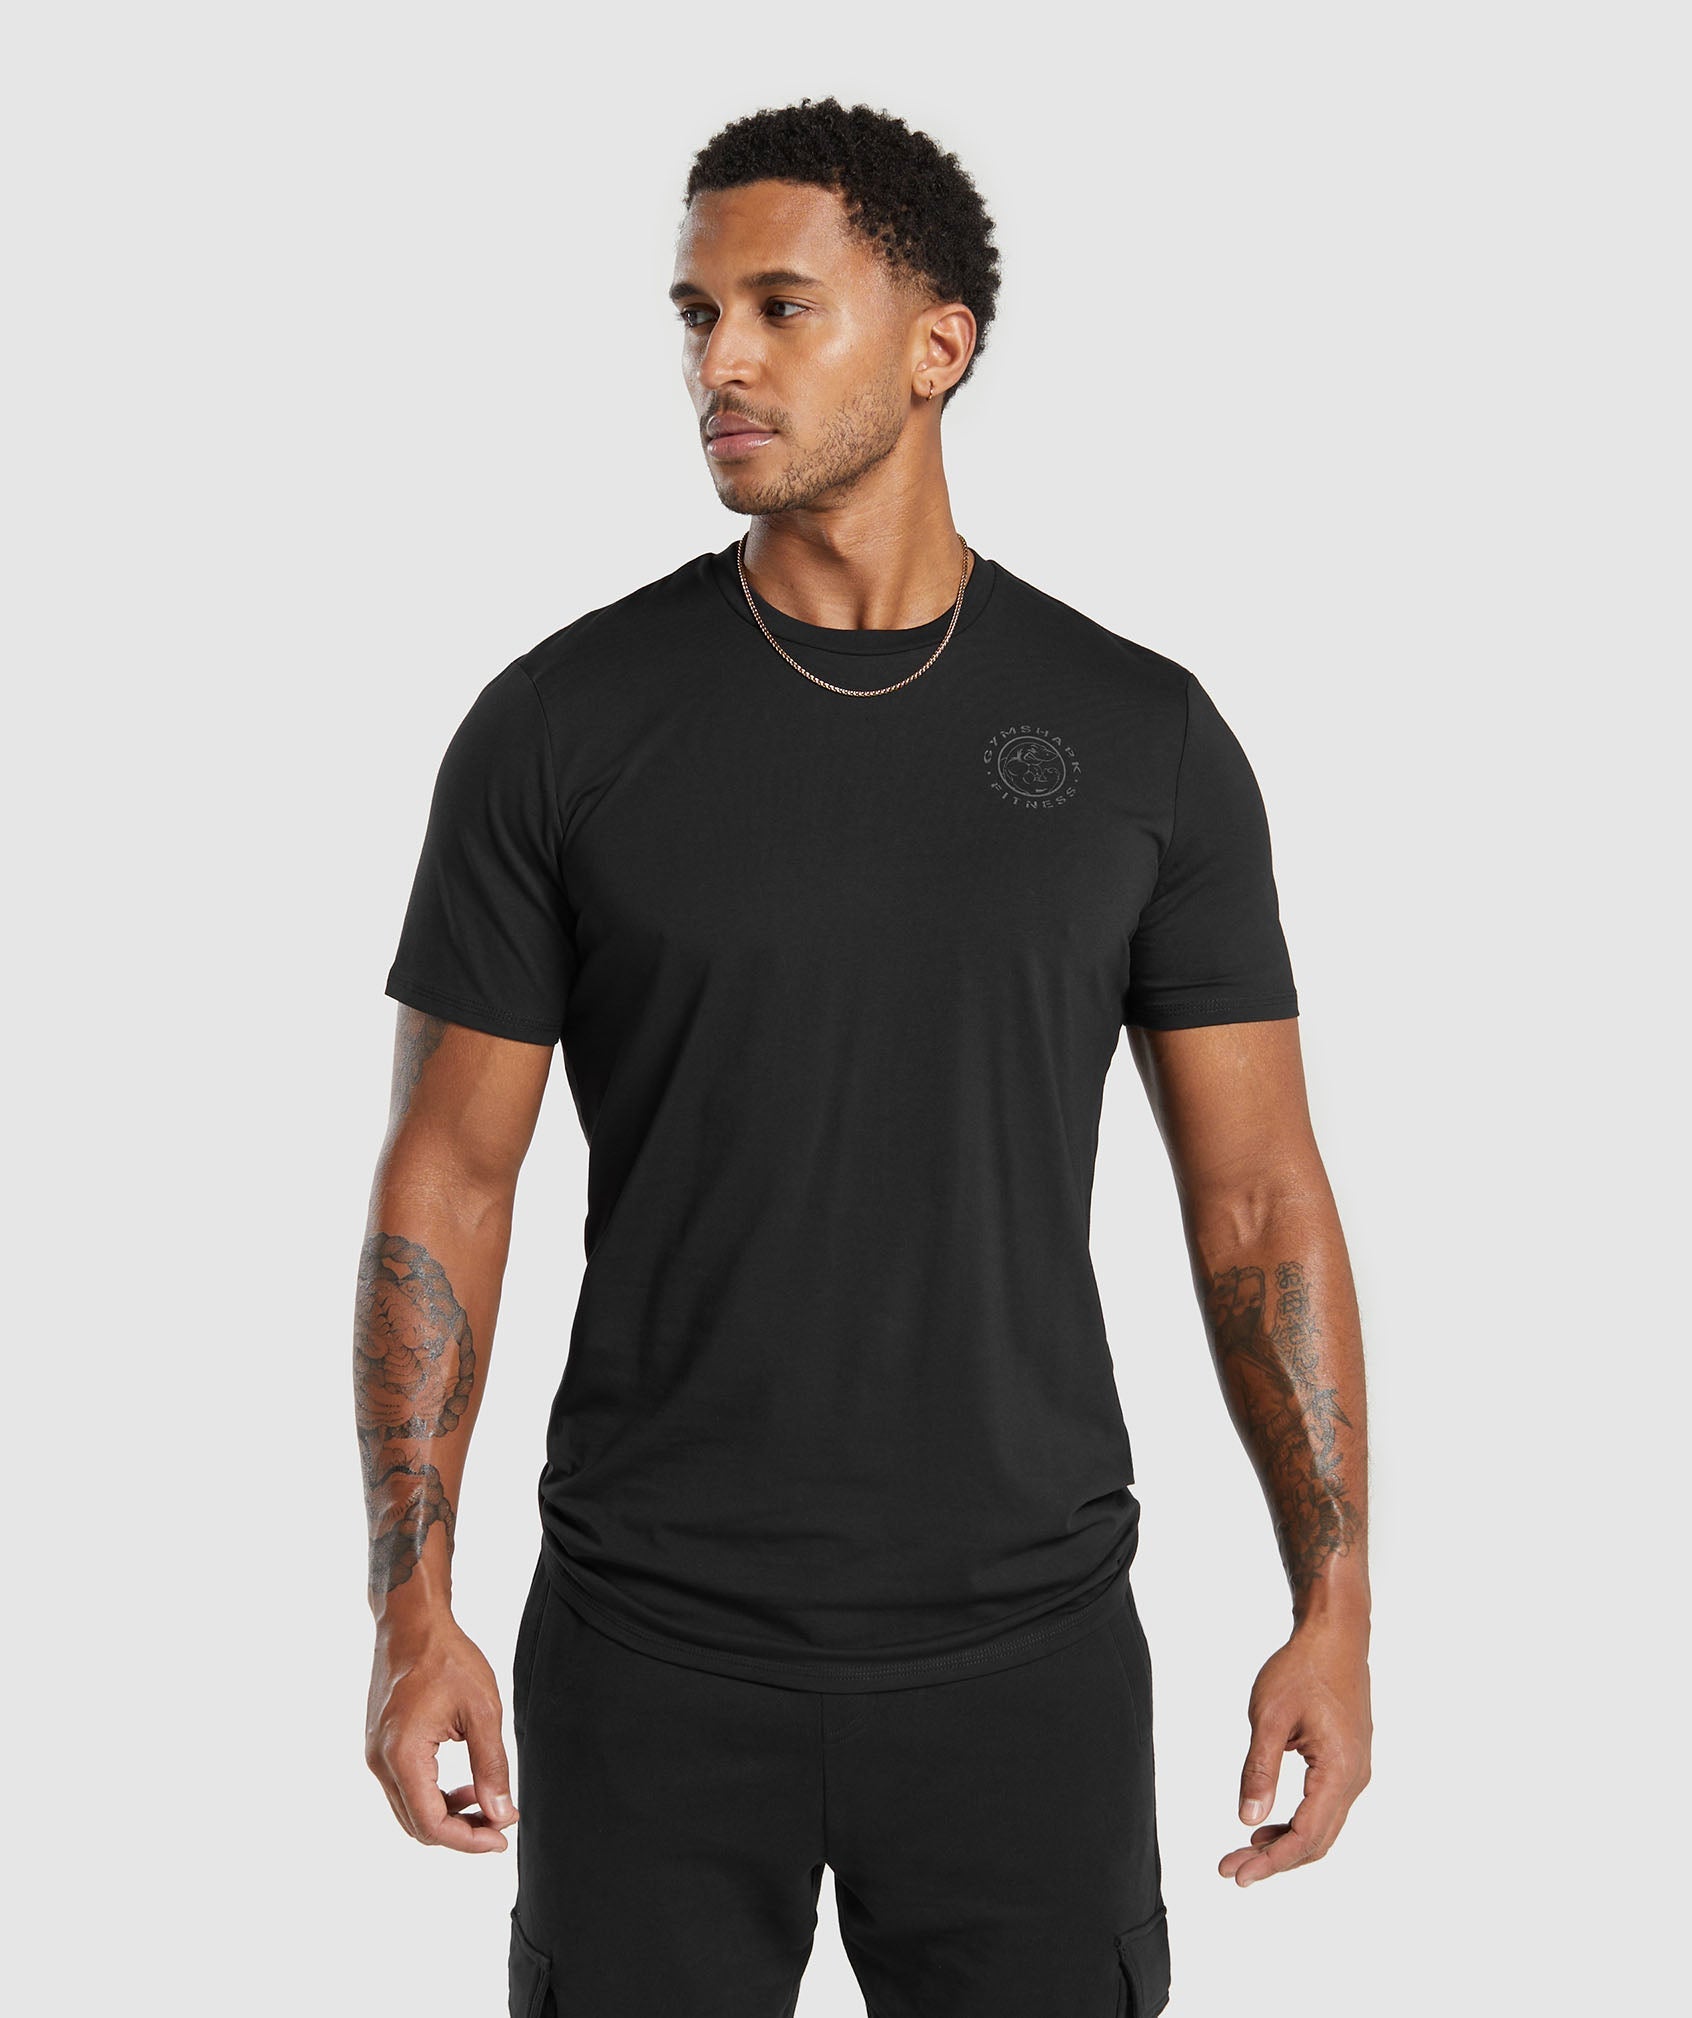 Legacy T-Shirt in Black - view 5